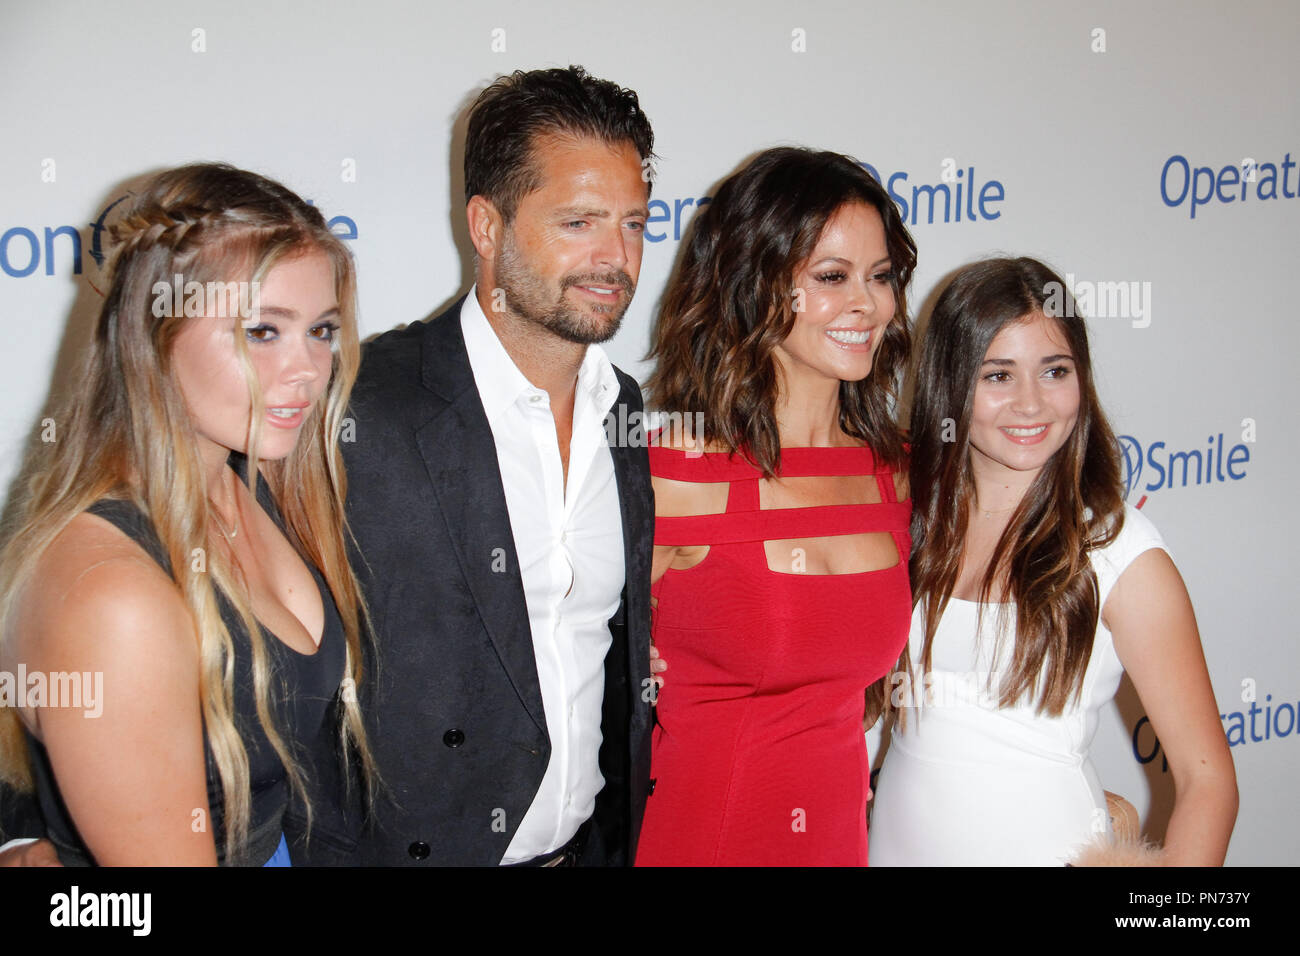 David Charvet, Brooke Burke-Charvet and family at the 2015 Operation Smile Gala held at the Beverly Wilshire Hotel in Beverly Hills, CA, October 2, 2015. Photo by Joe Martinez / PictureLux Stock Photo